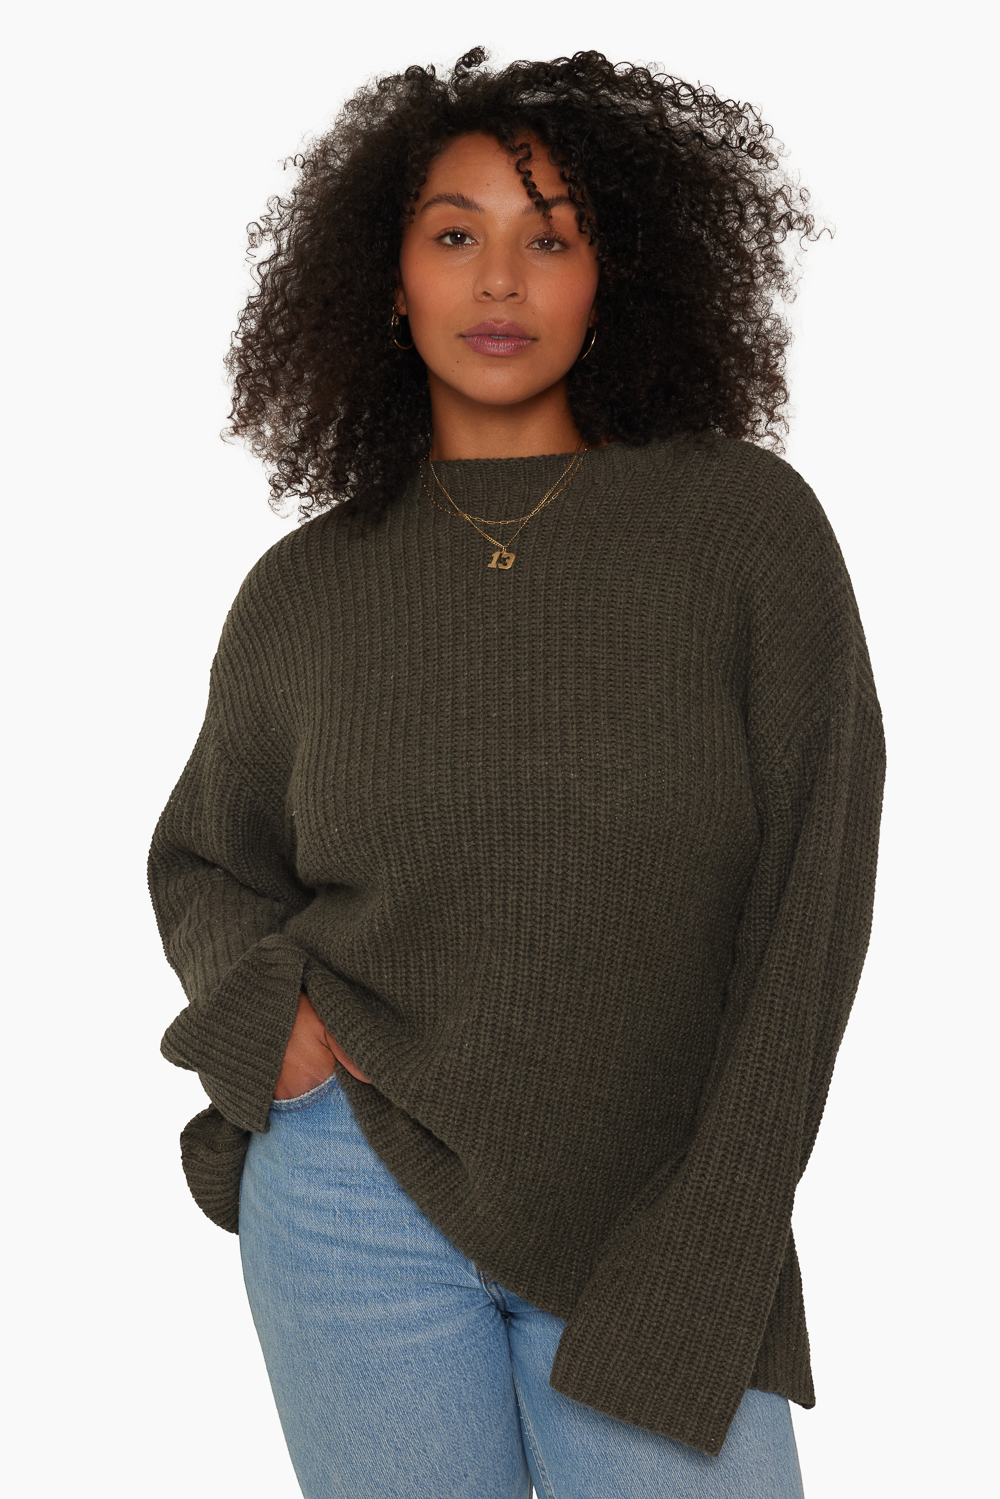 CHUNKY RIB KNIT OVERSIZED MOCK NECK SWEATER - SHADOW Featured Image